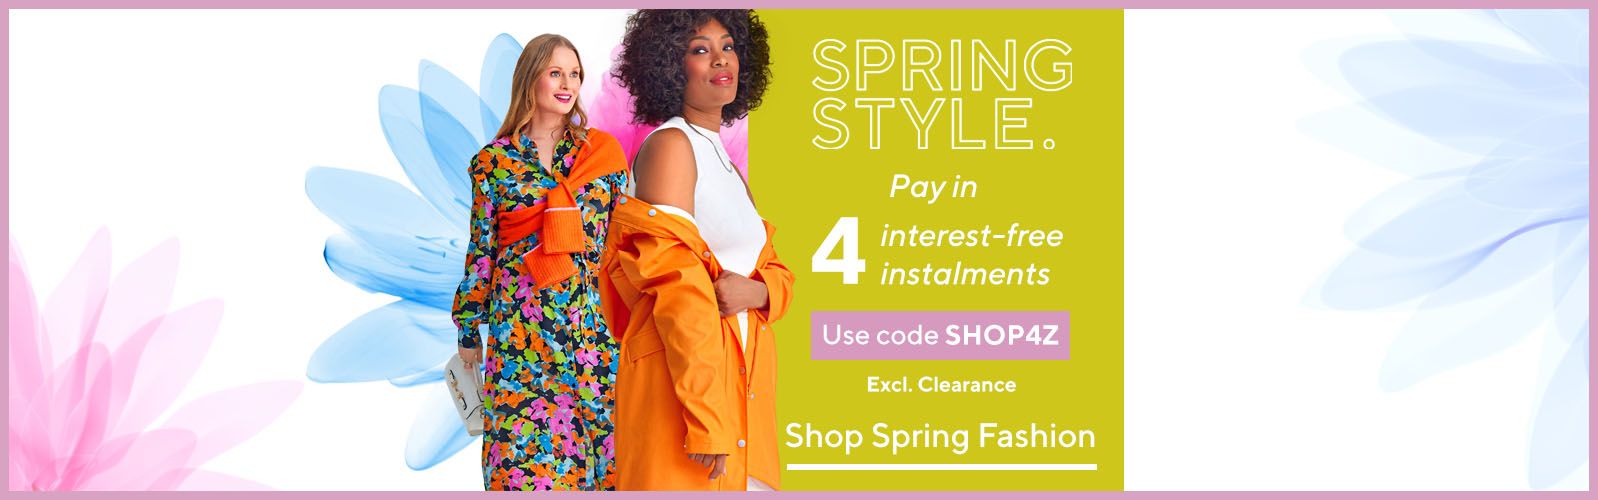 Everything in 4 interest-free instalments